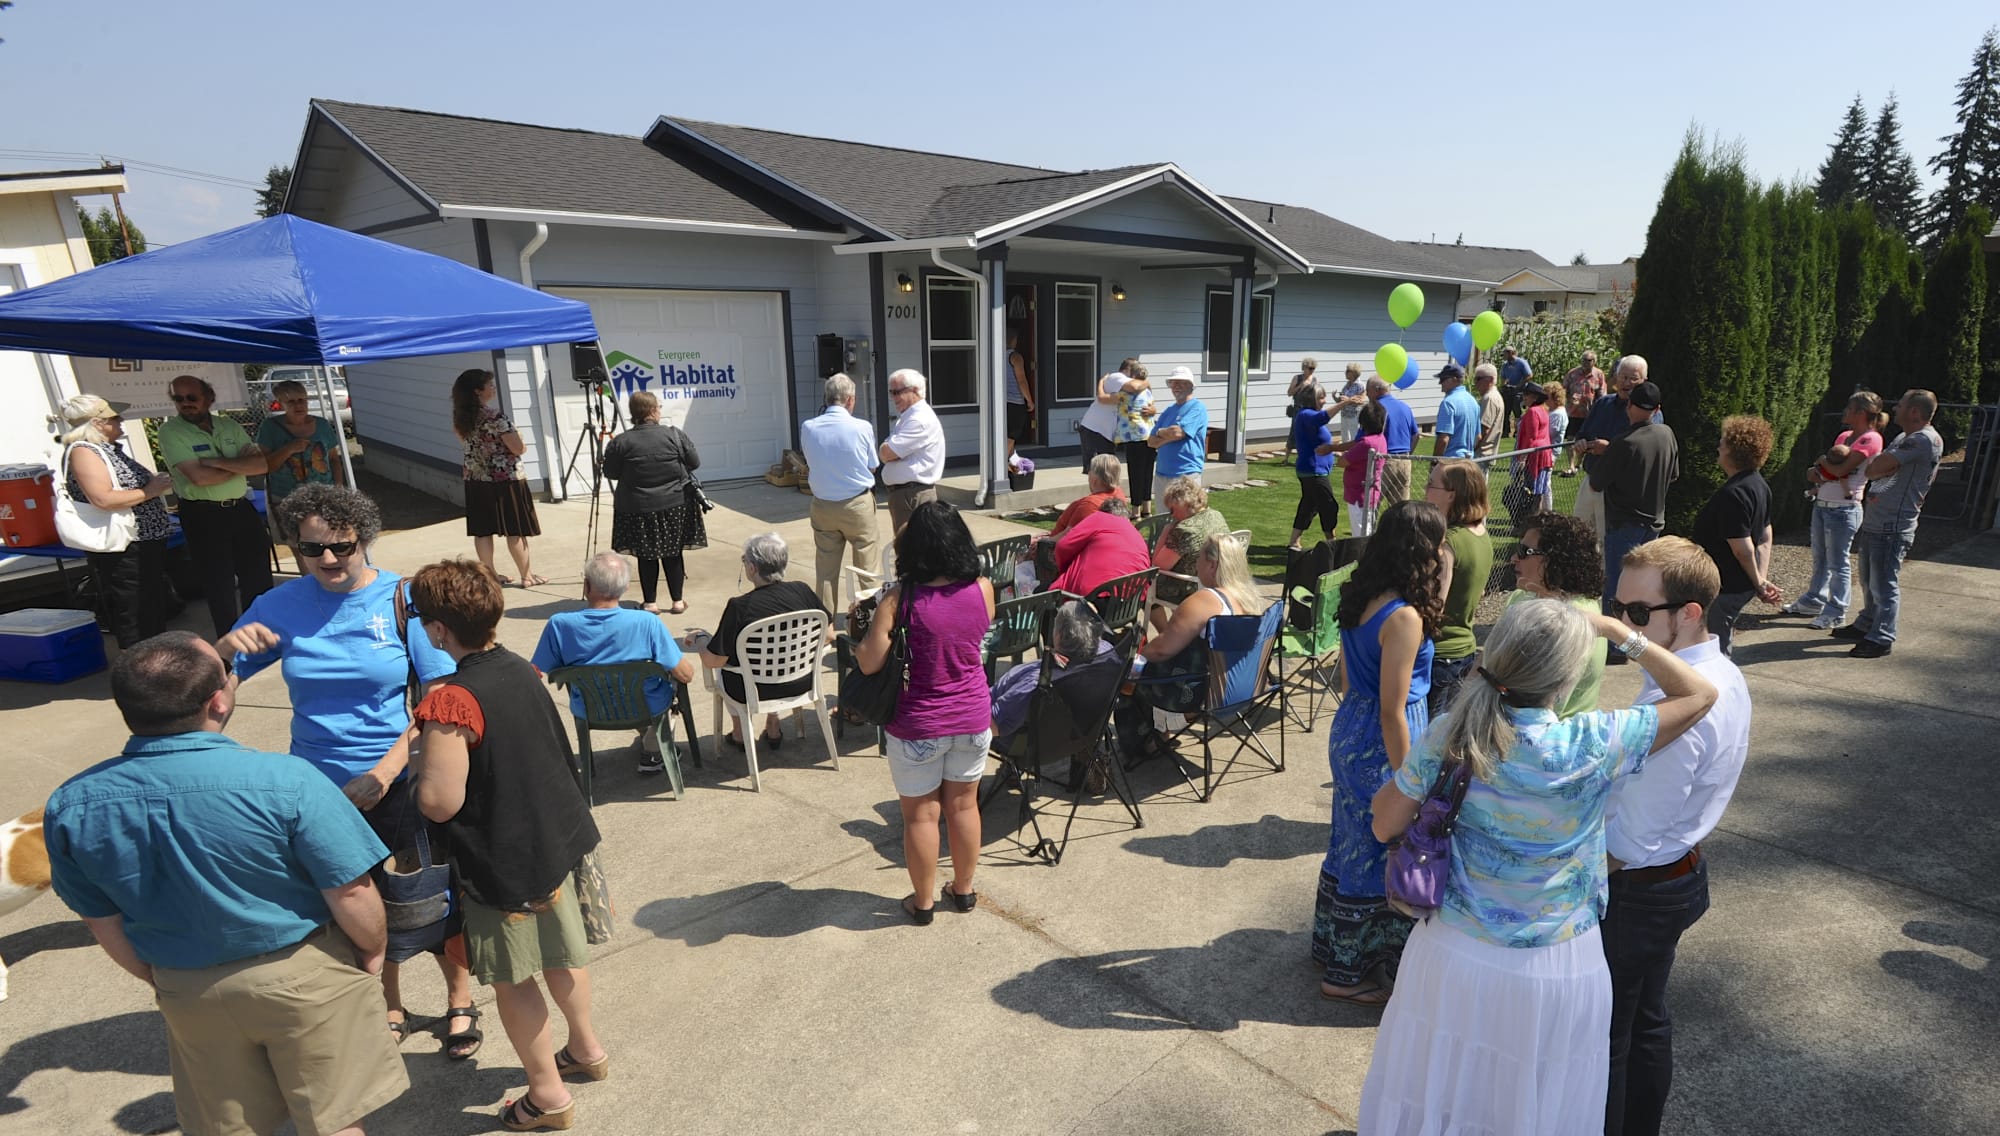 About 50 guests, donors and volunteers gathered for Sunday's dedication of the 30th local Habitat for Humanity home.